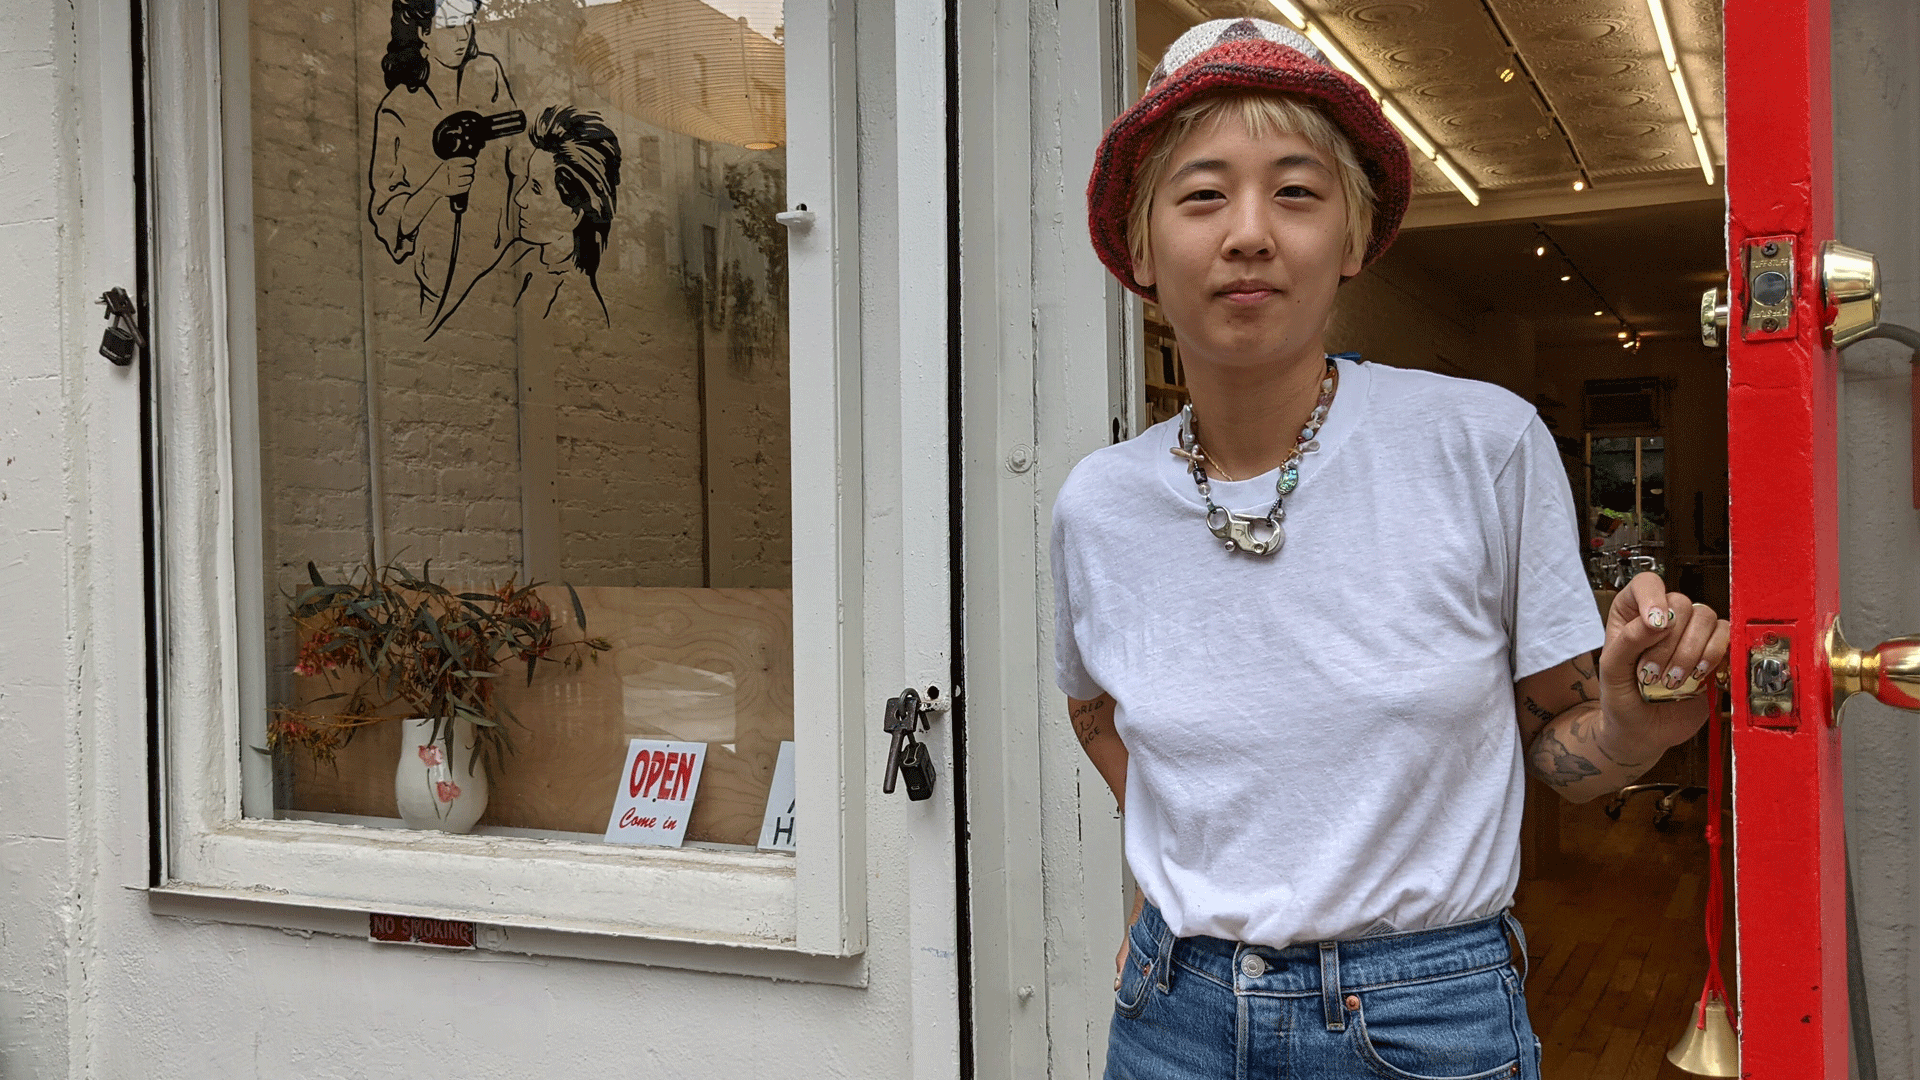 A person standing in front of a white business store-front. They’re wearing a white shirt, blue jeans, a red hat, and a necklace welcoming a customer into the shop.